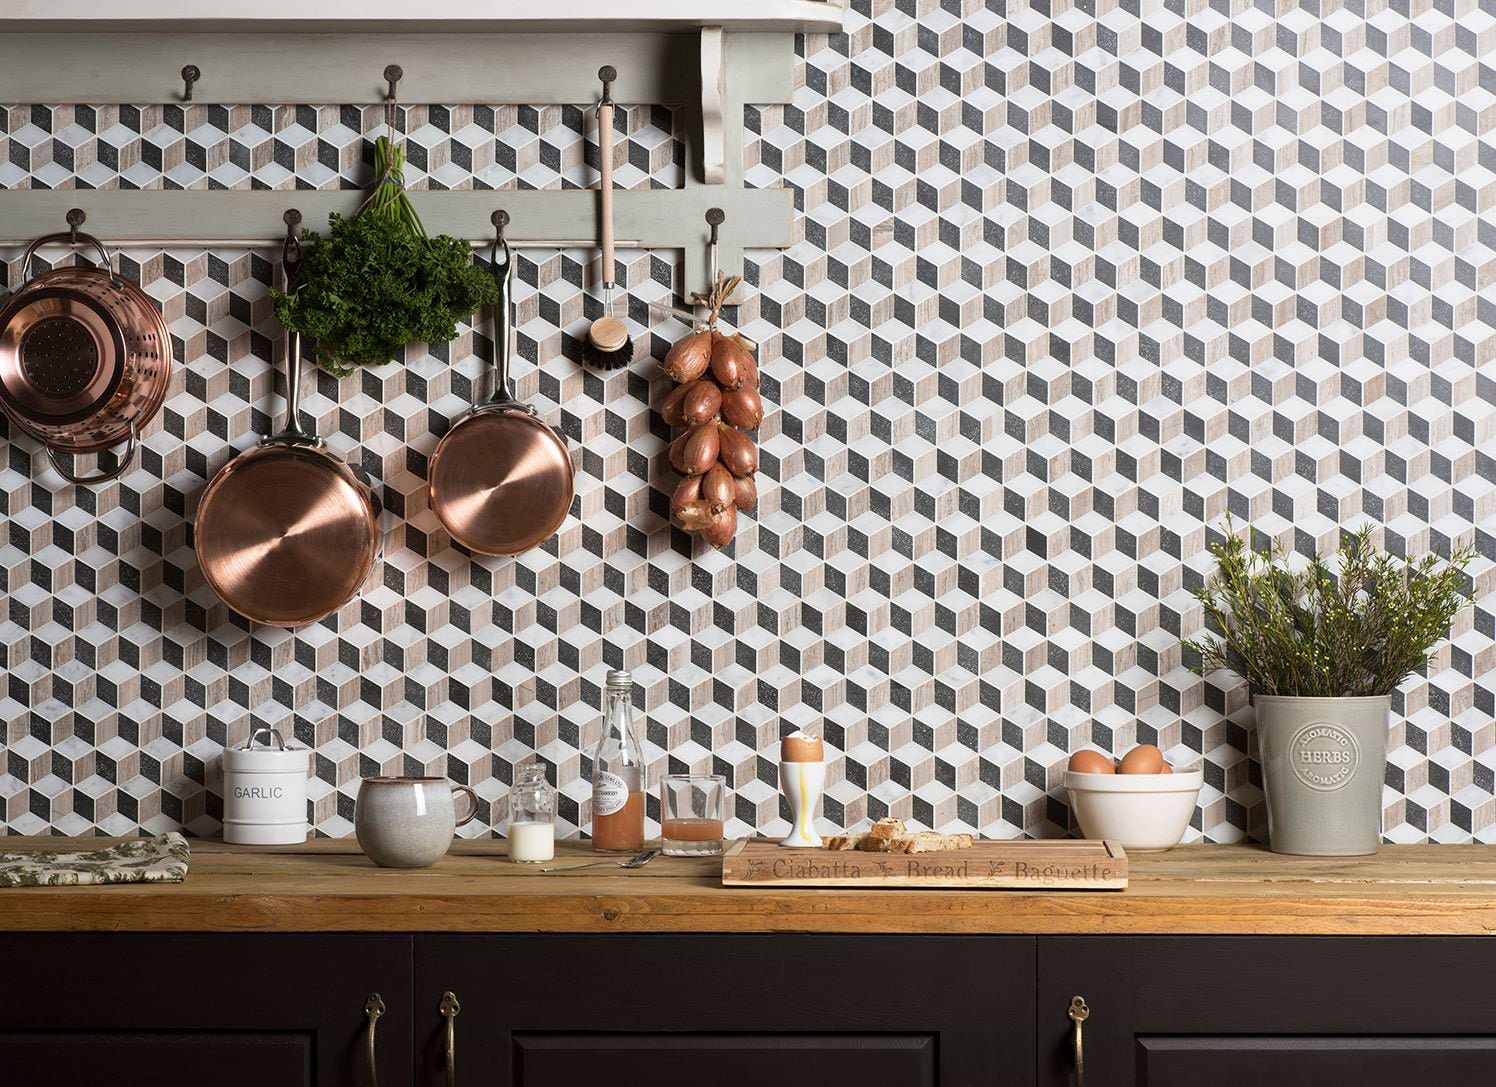 6 ideas for creating the perfect backsplash for your kitchen - Hyperion Tiles